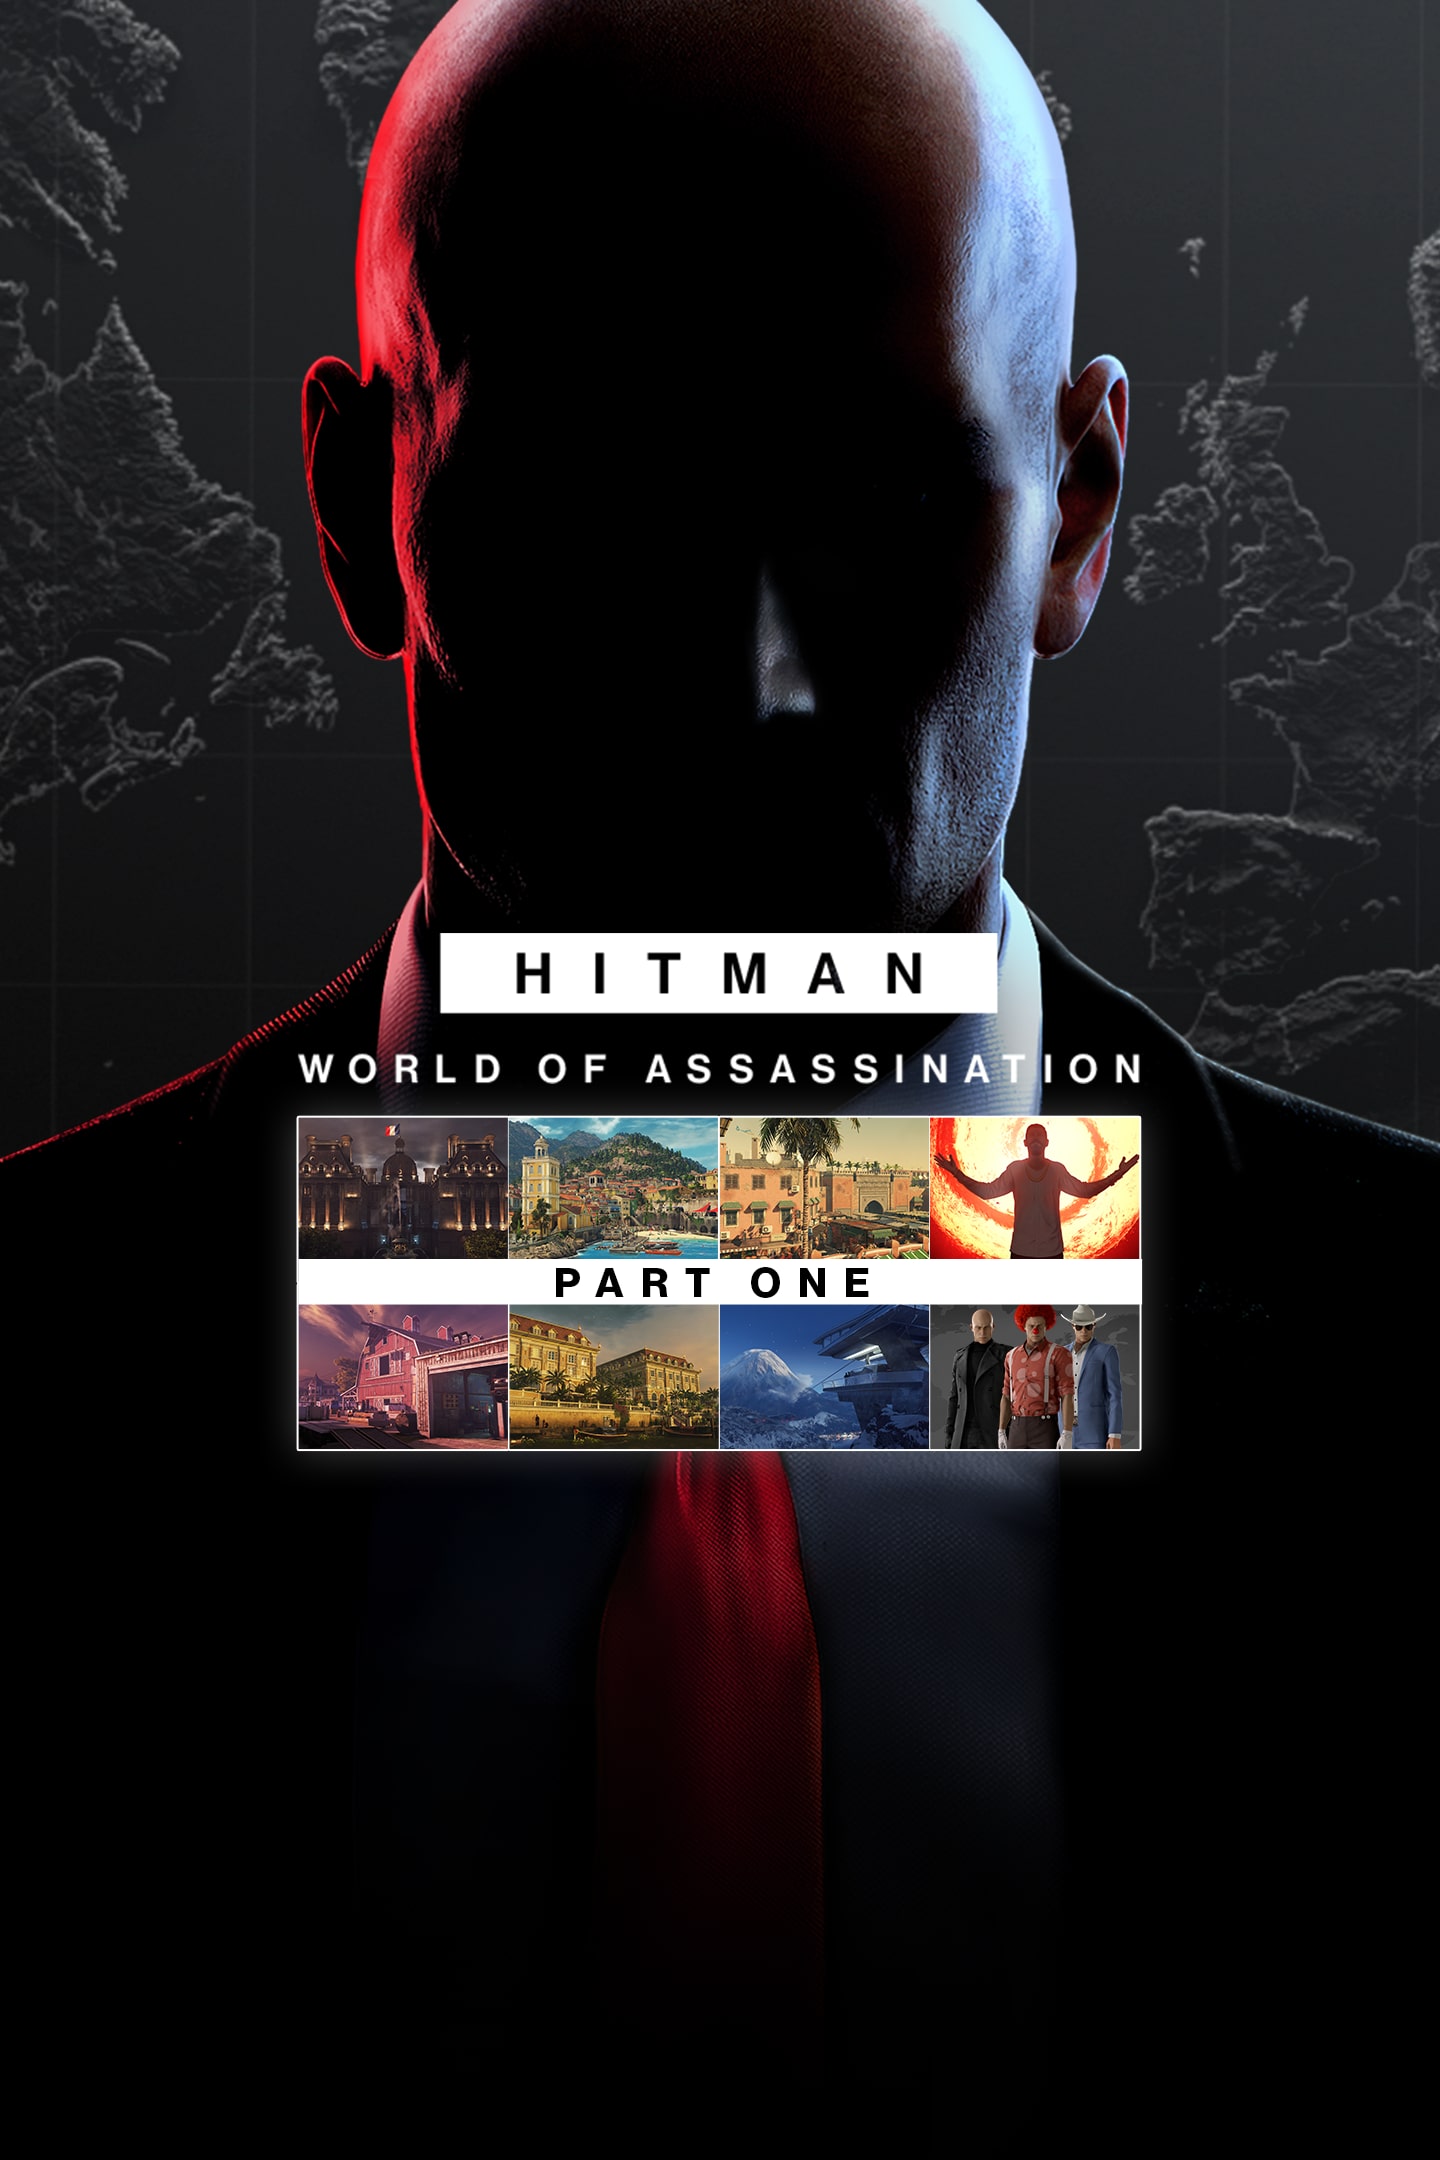 Hitman 3 Free Starter Pack features bonus mission The Icon for a